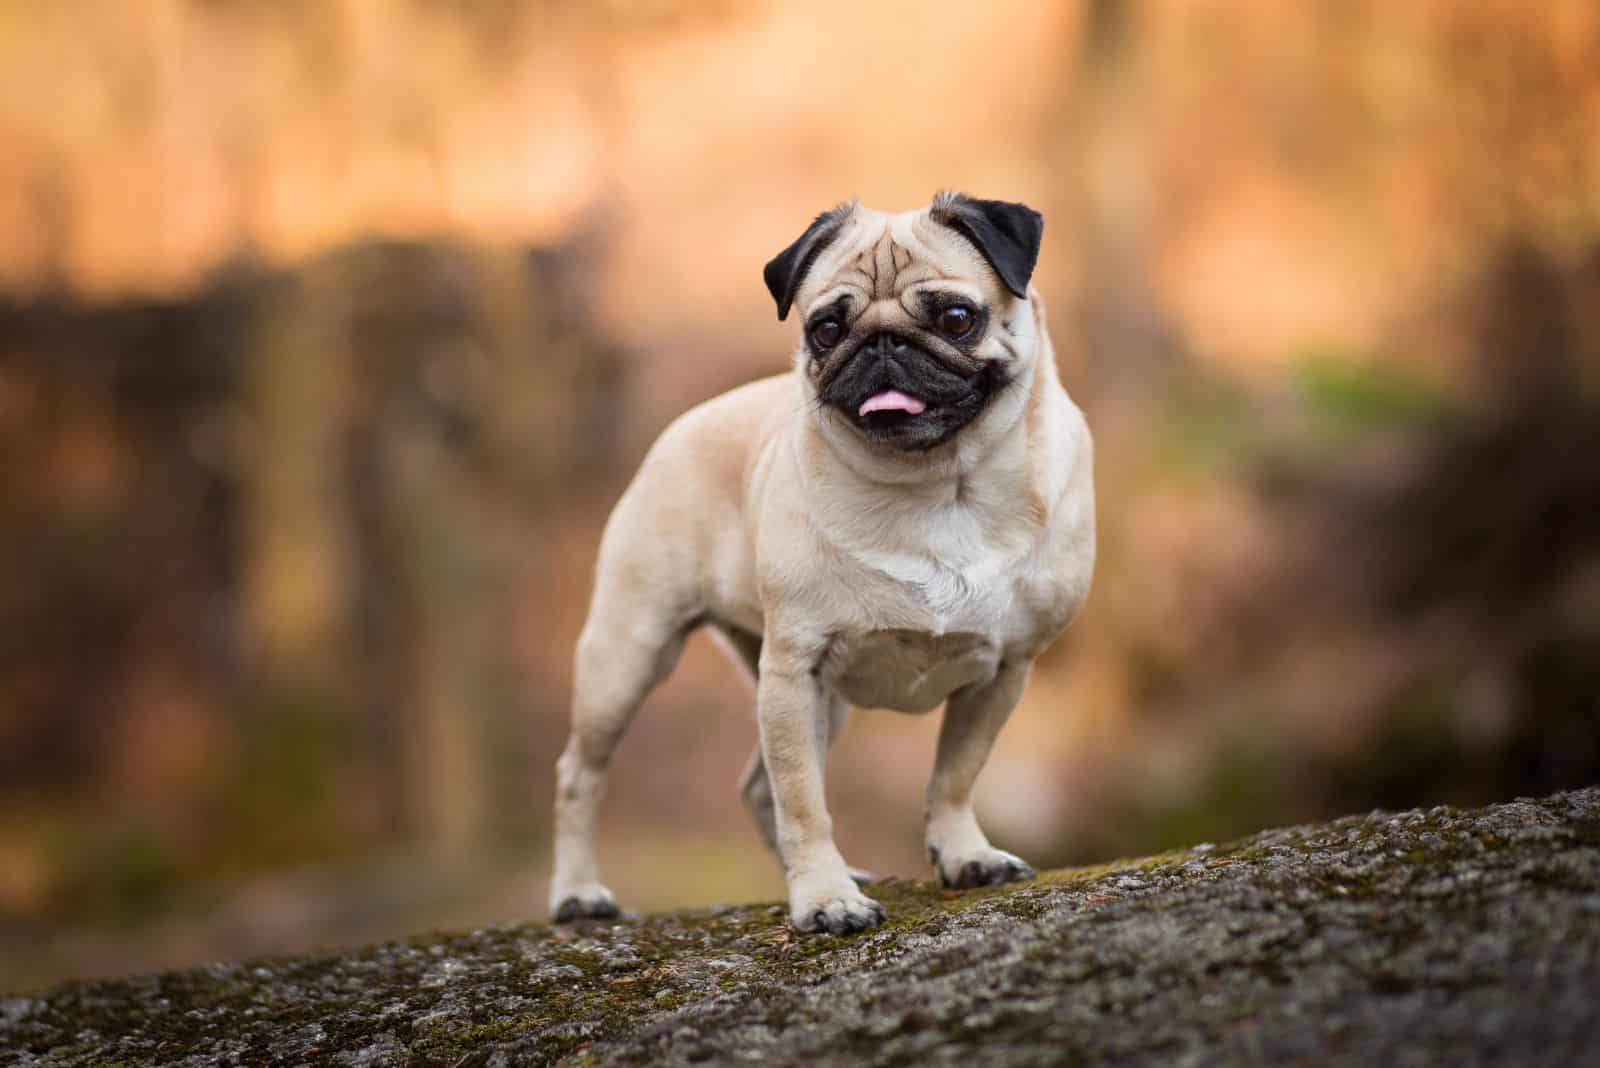 the pug is standing on a stone